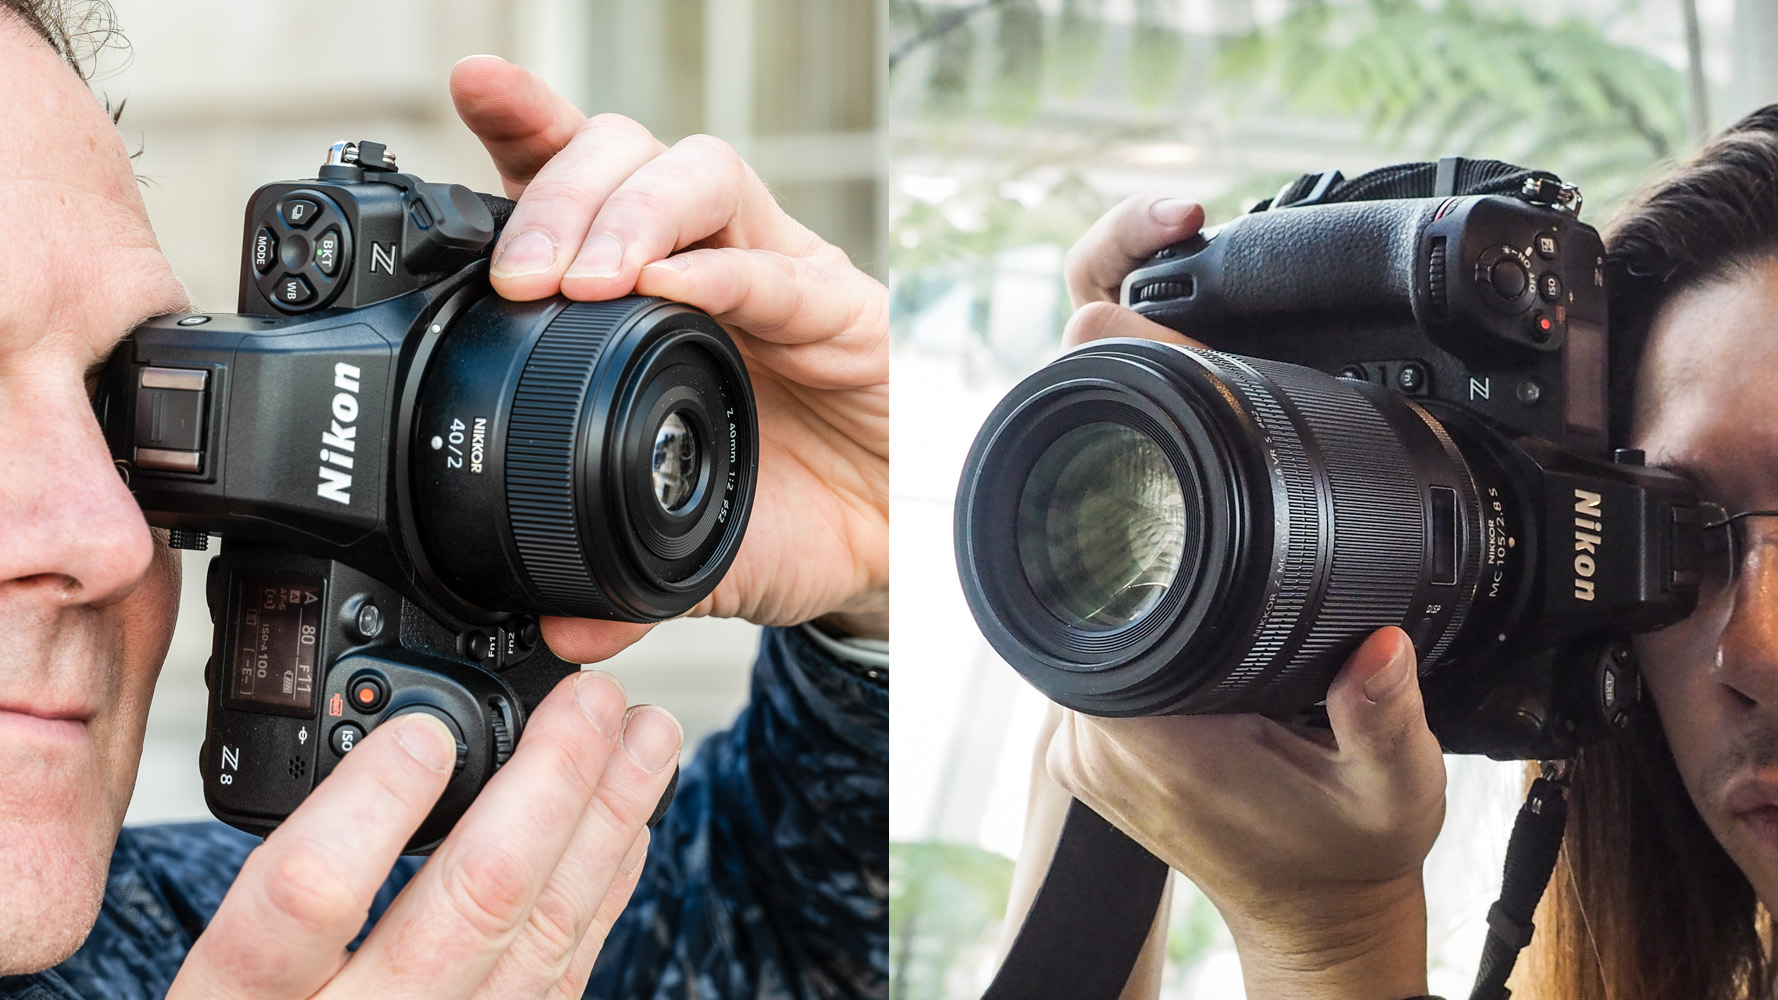 Nikon z8 Review: The One We've Been Waiting For